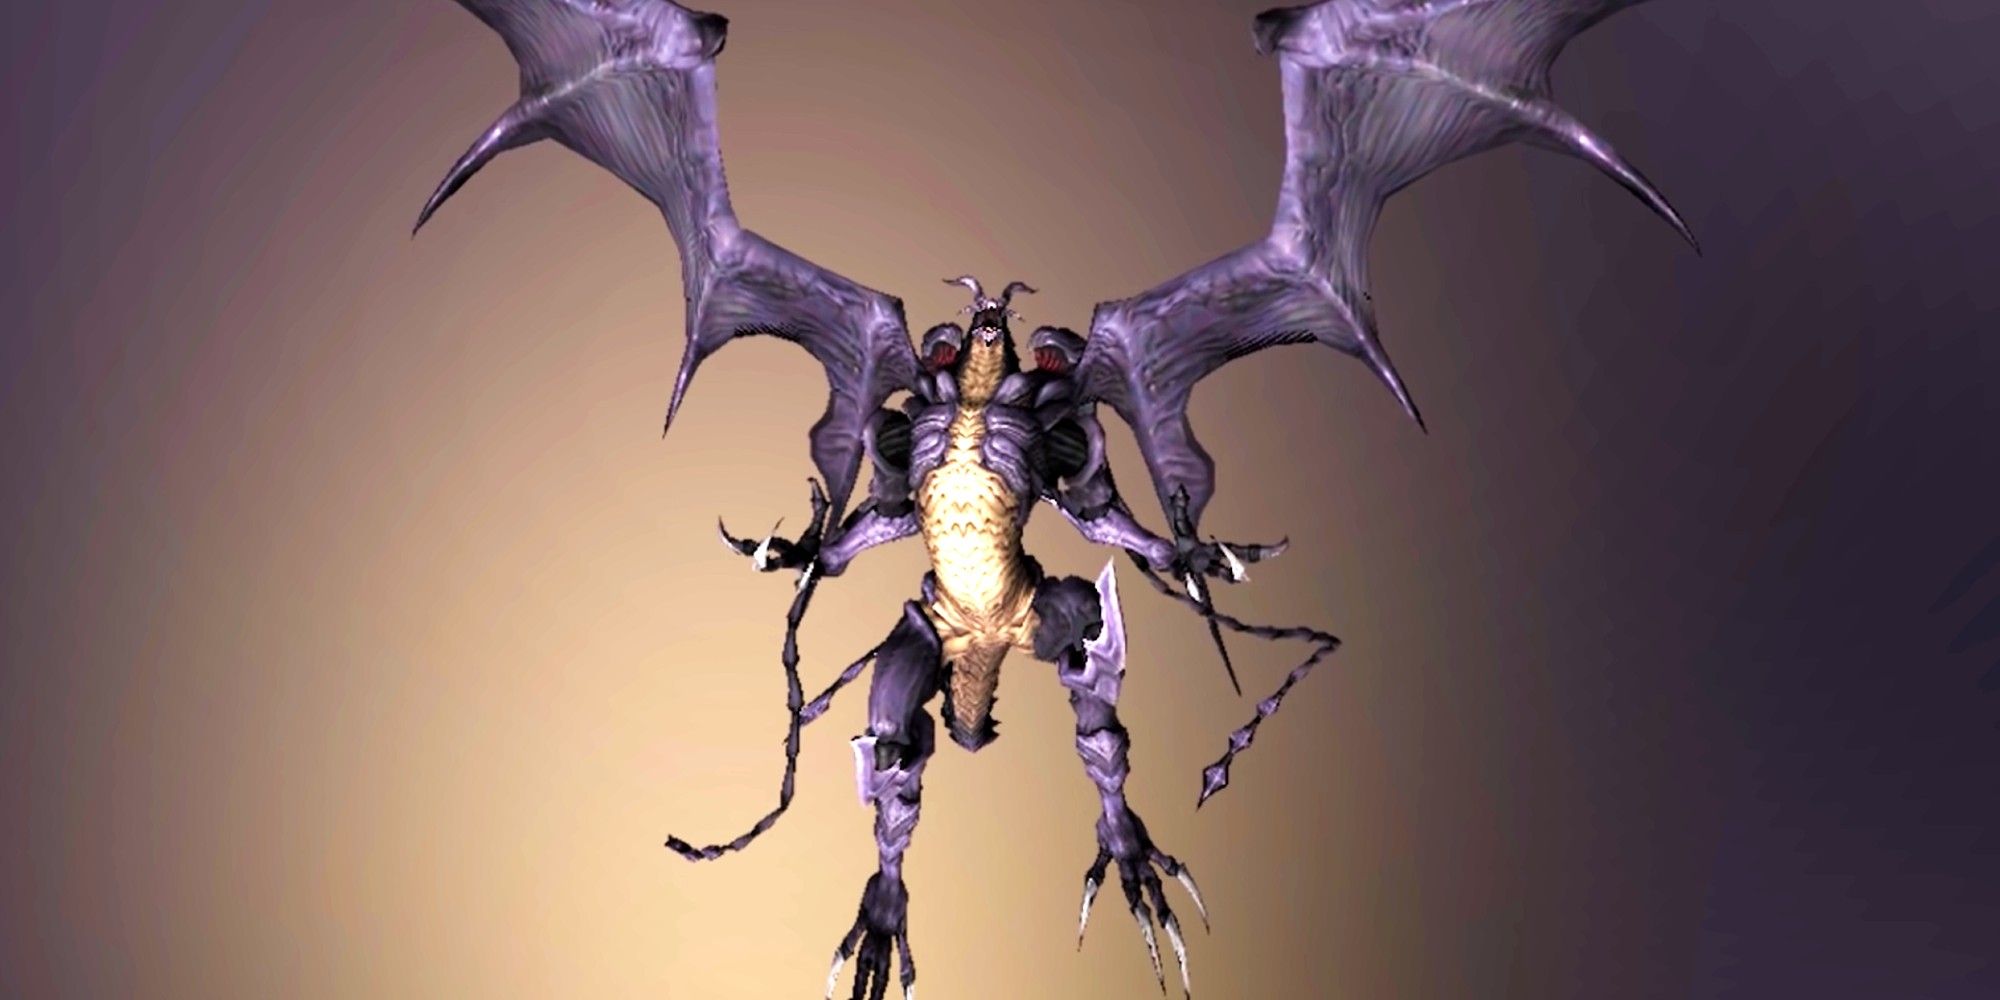 Bahamut FF11 floating in all his glory